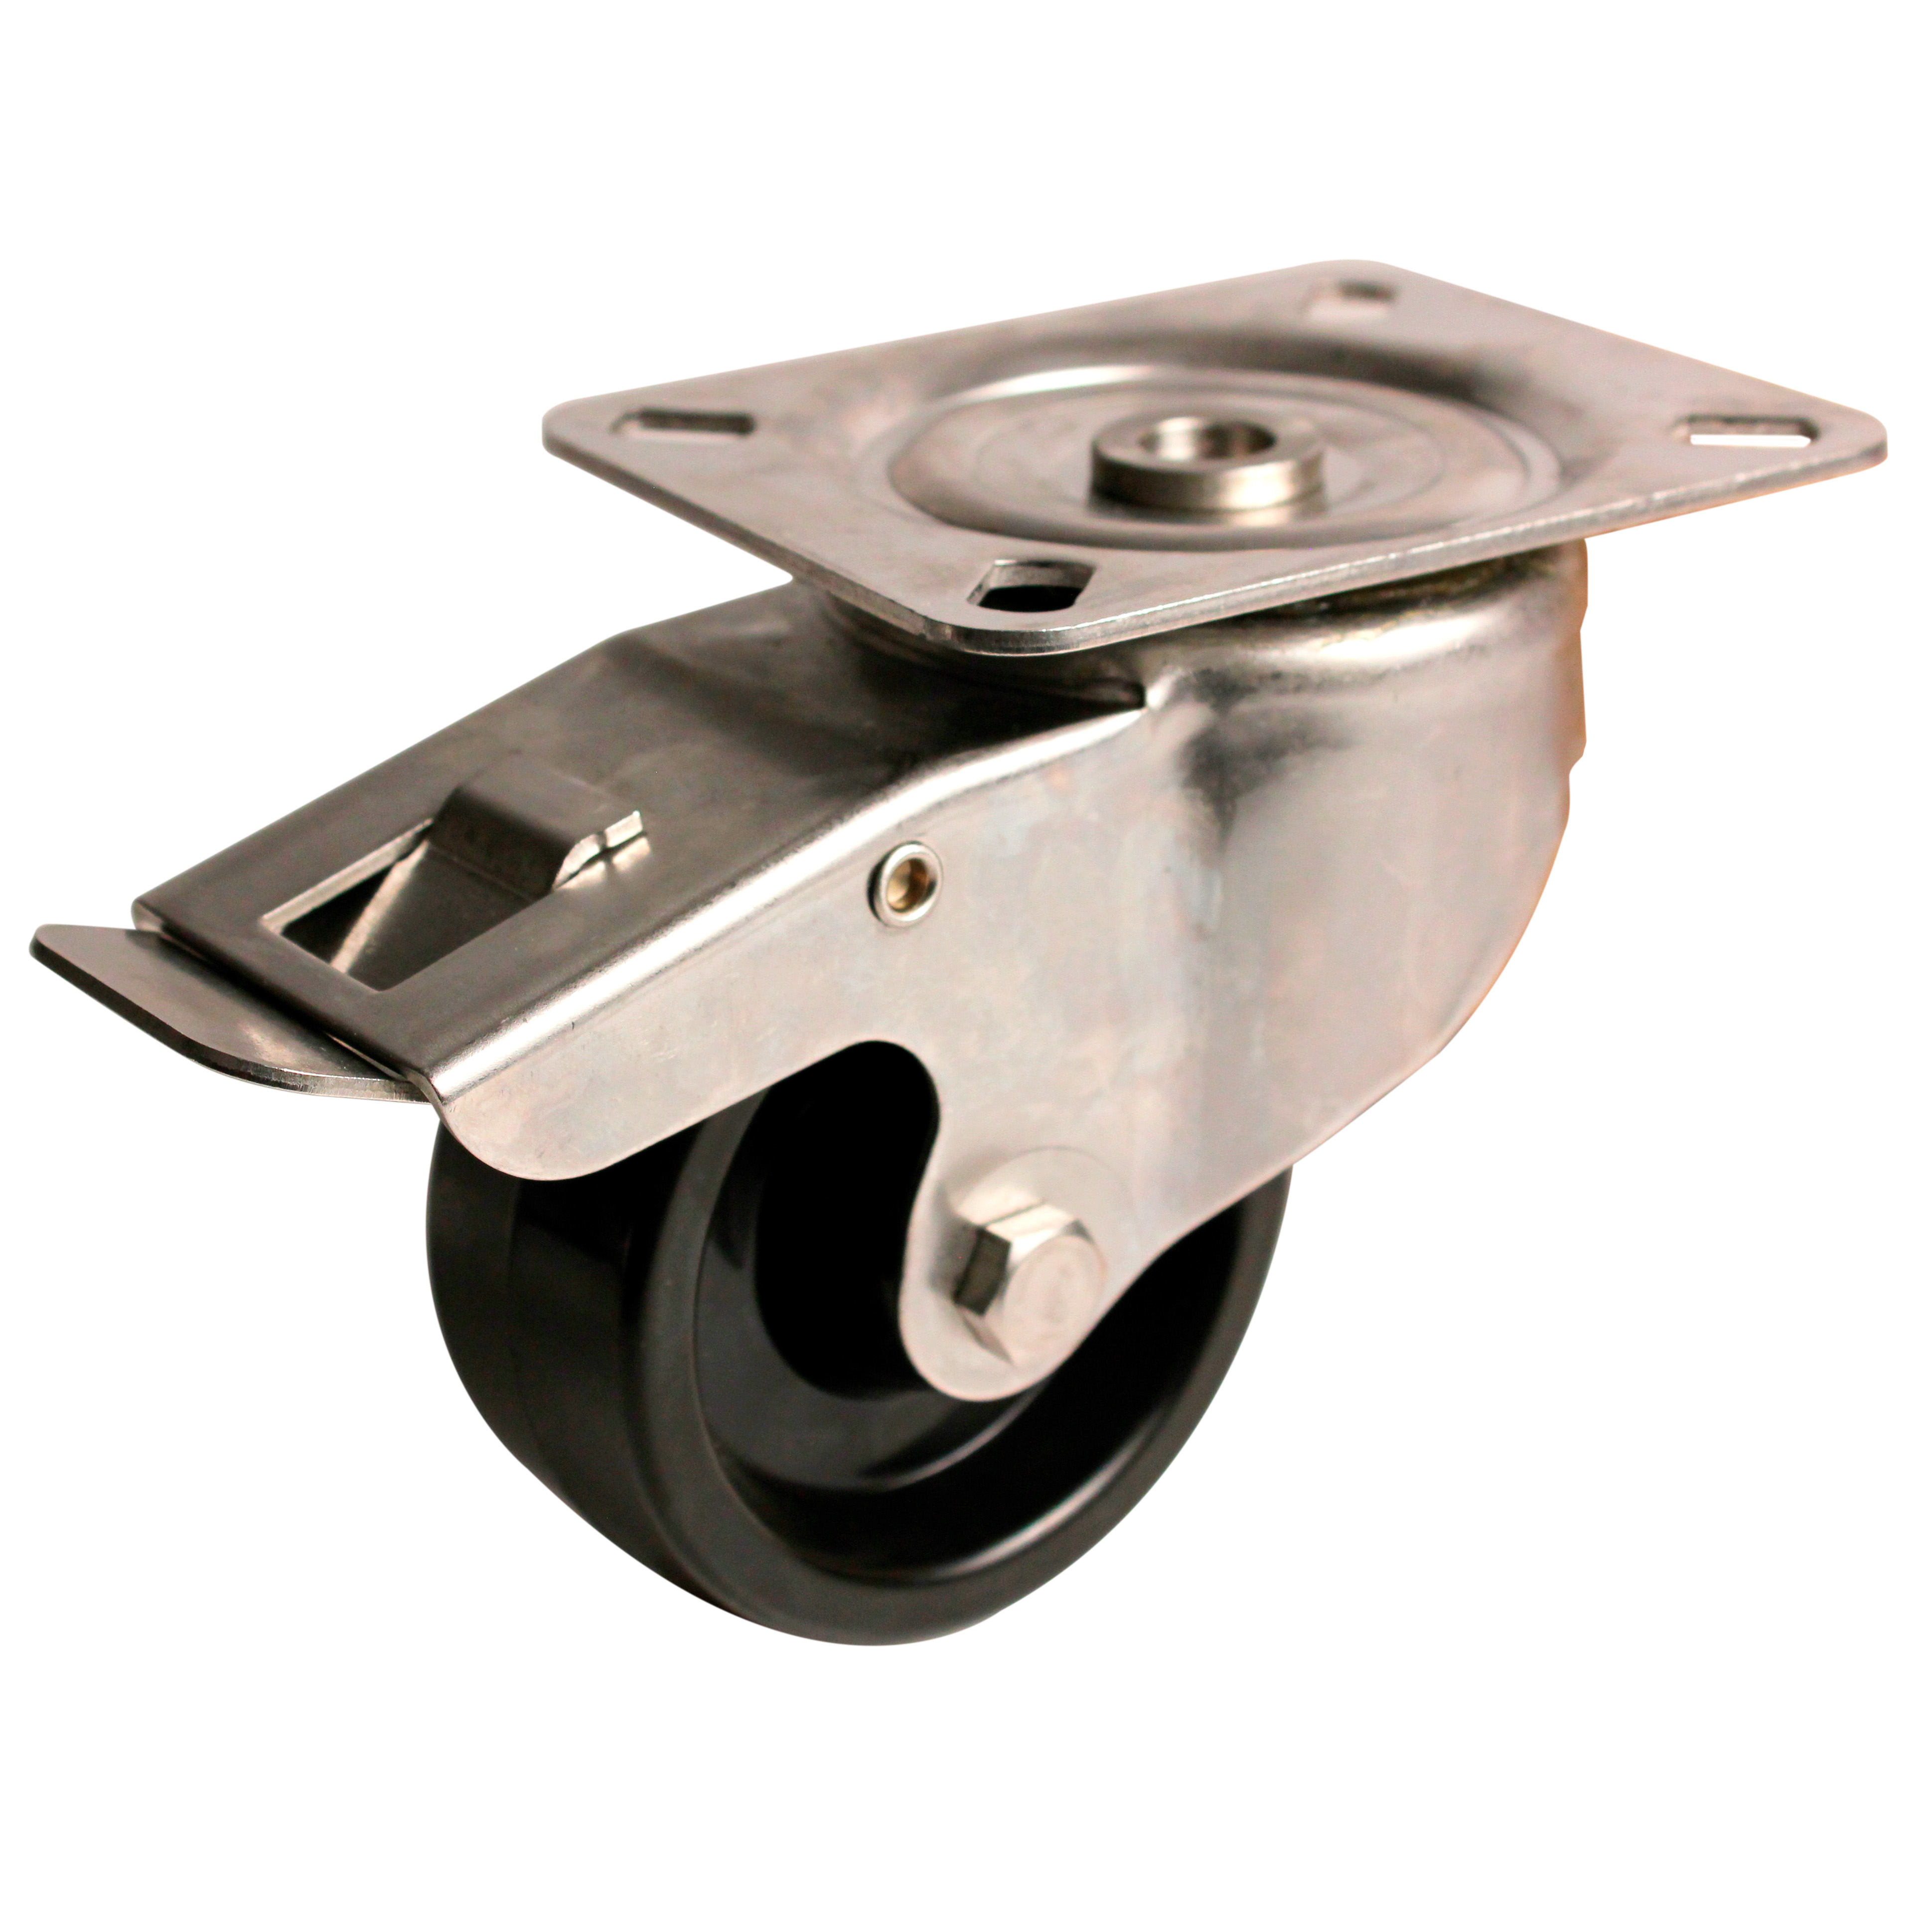 High Temperature Castor - up to 200kg - Double locking swivel - 304 stainless steel